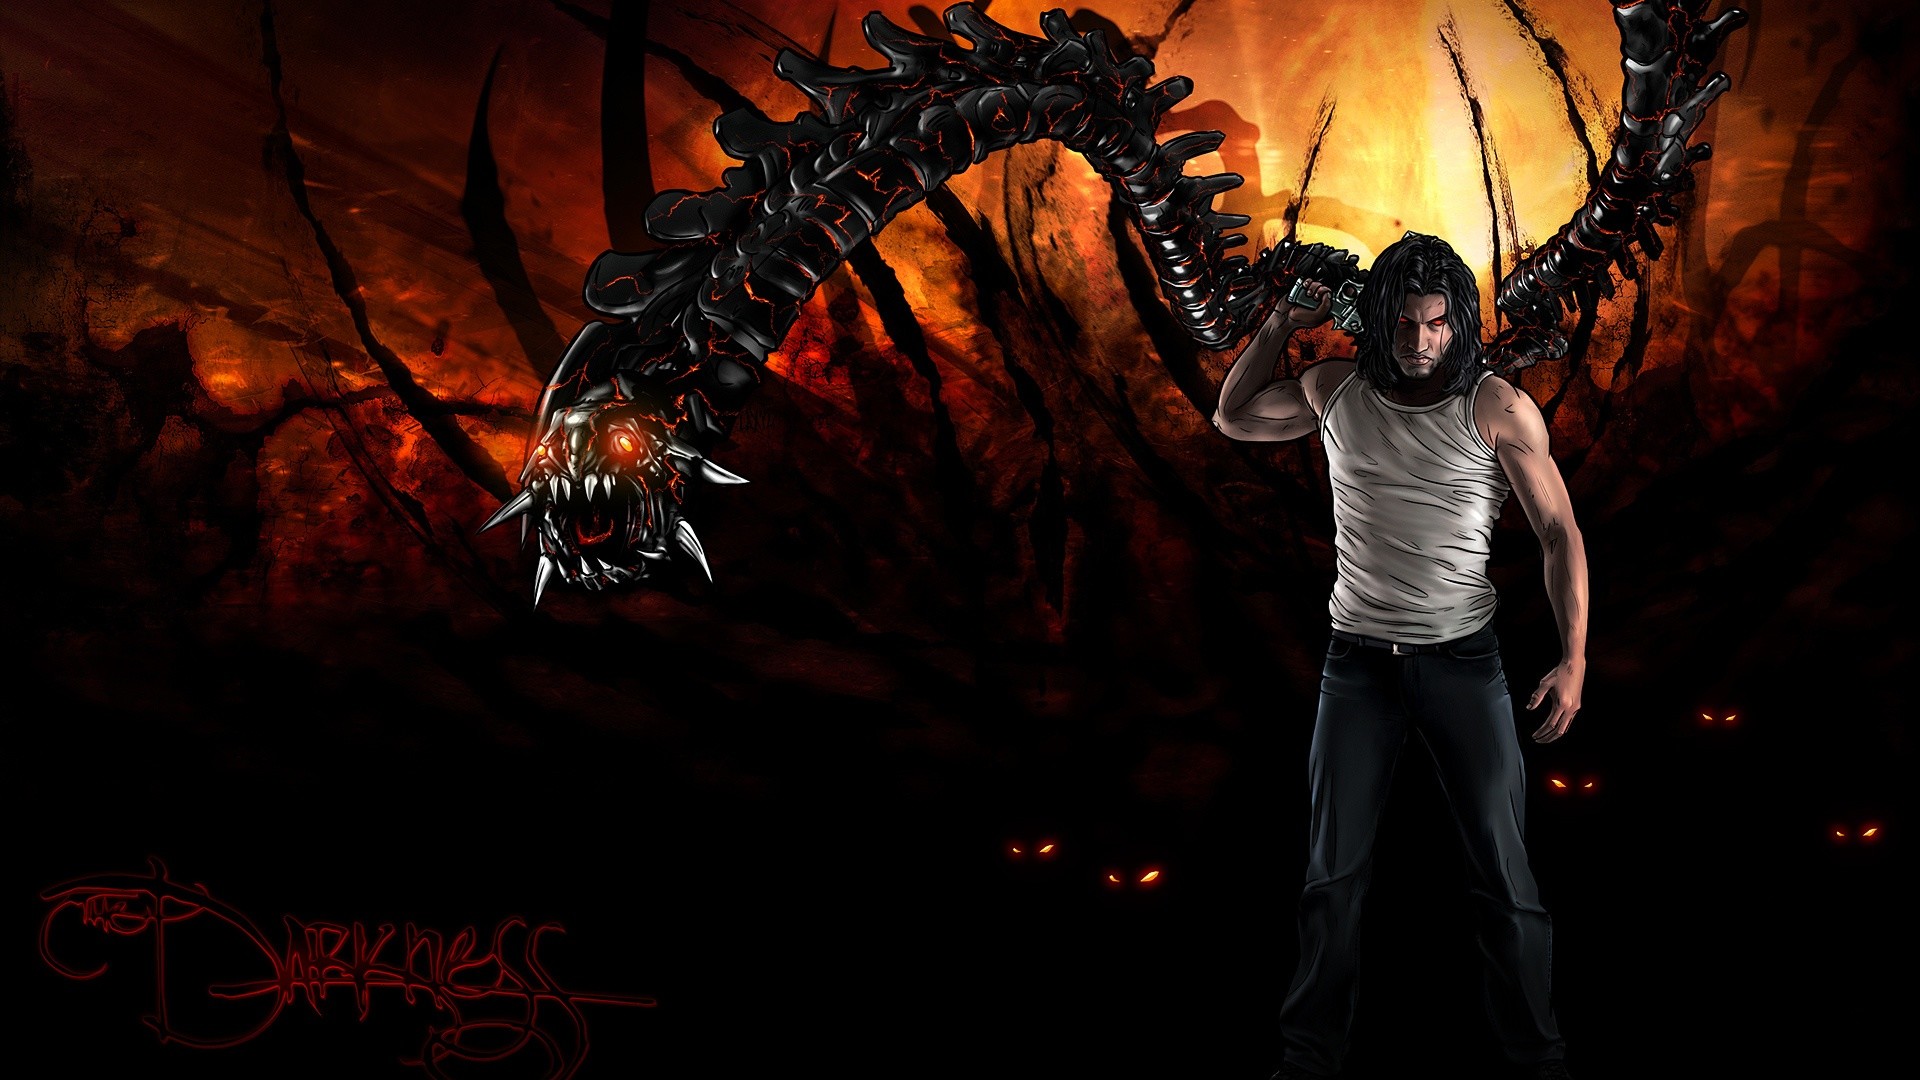 1920x1080 The Darkness 2 Video Game HD Wallpaper - DreamLoveWallpapers